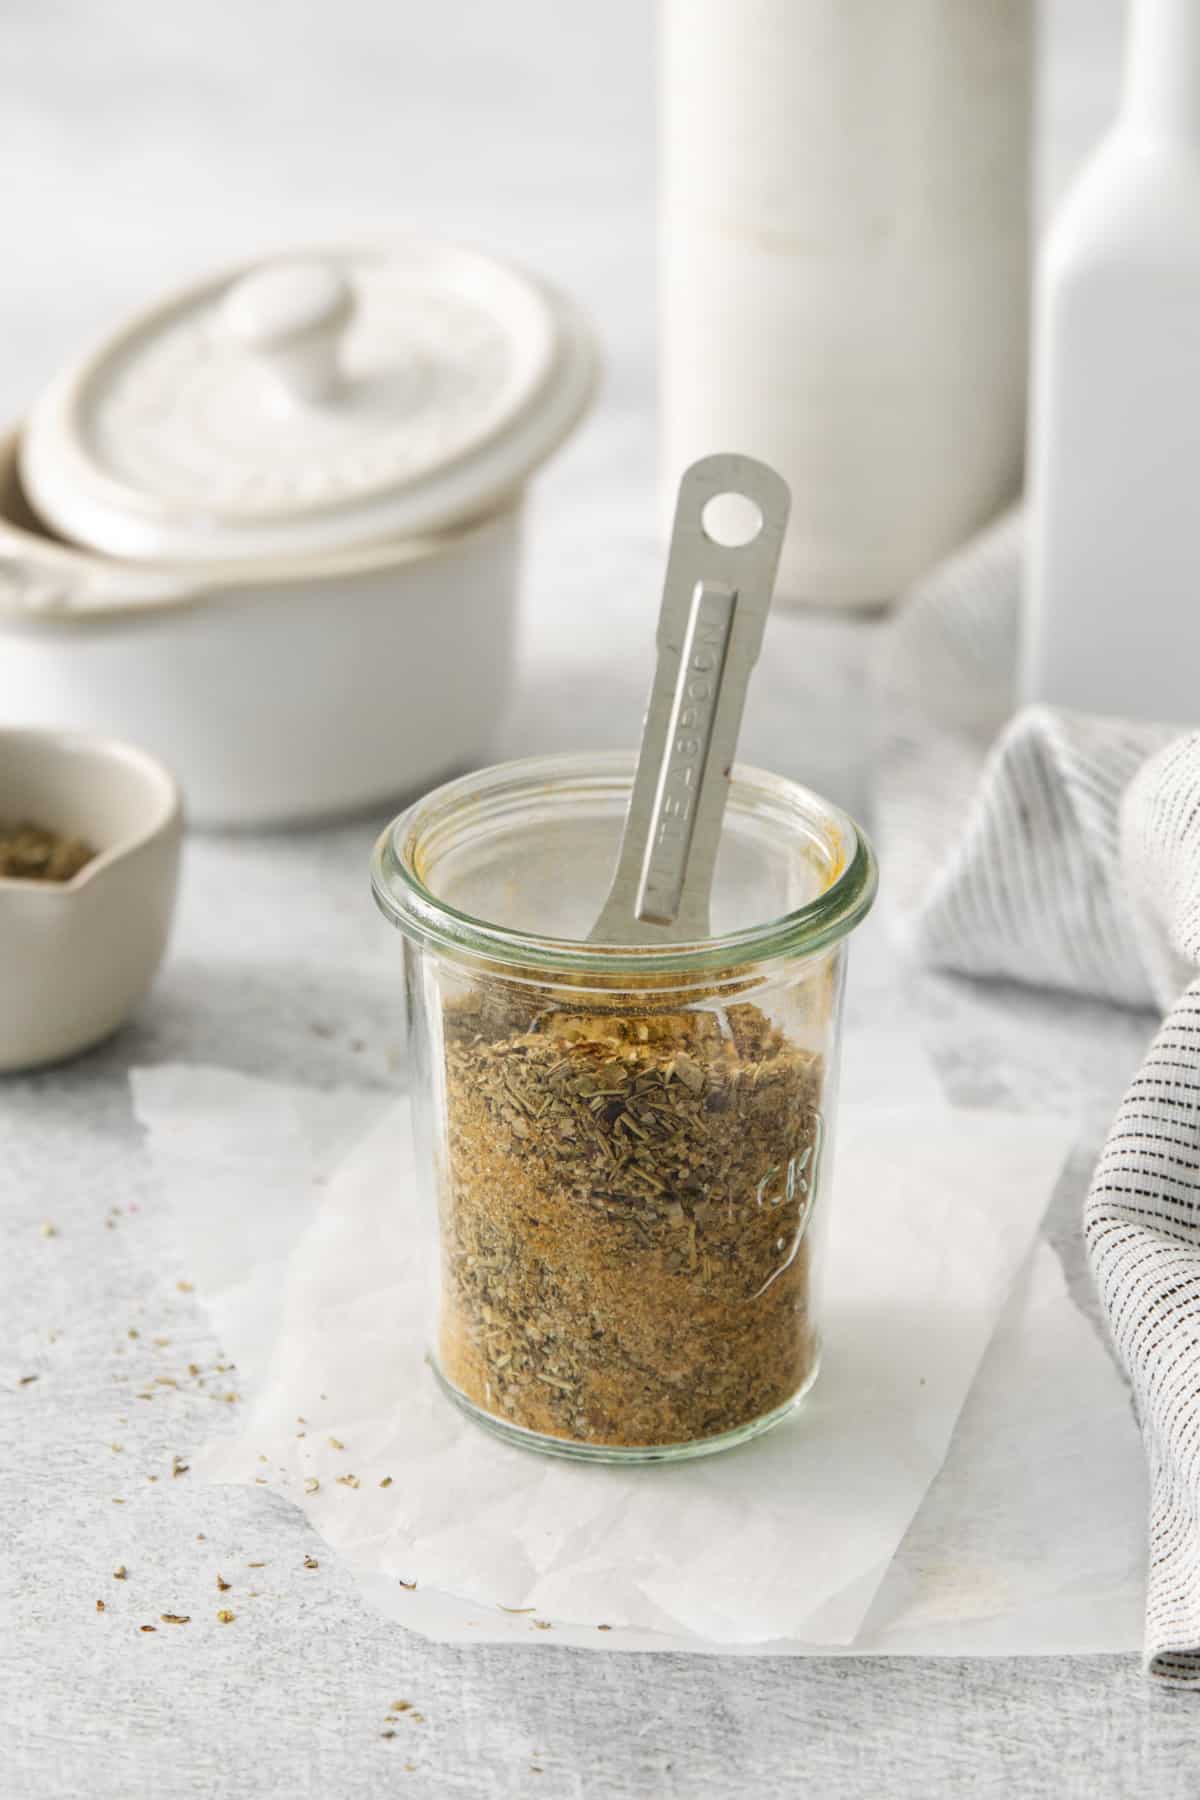 closeup of a jar of chicken rub with a measuring spoon.